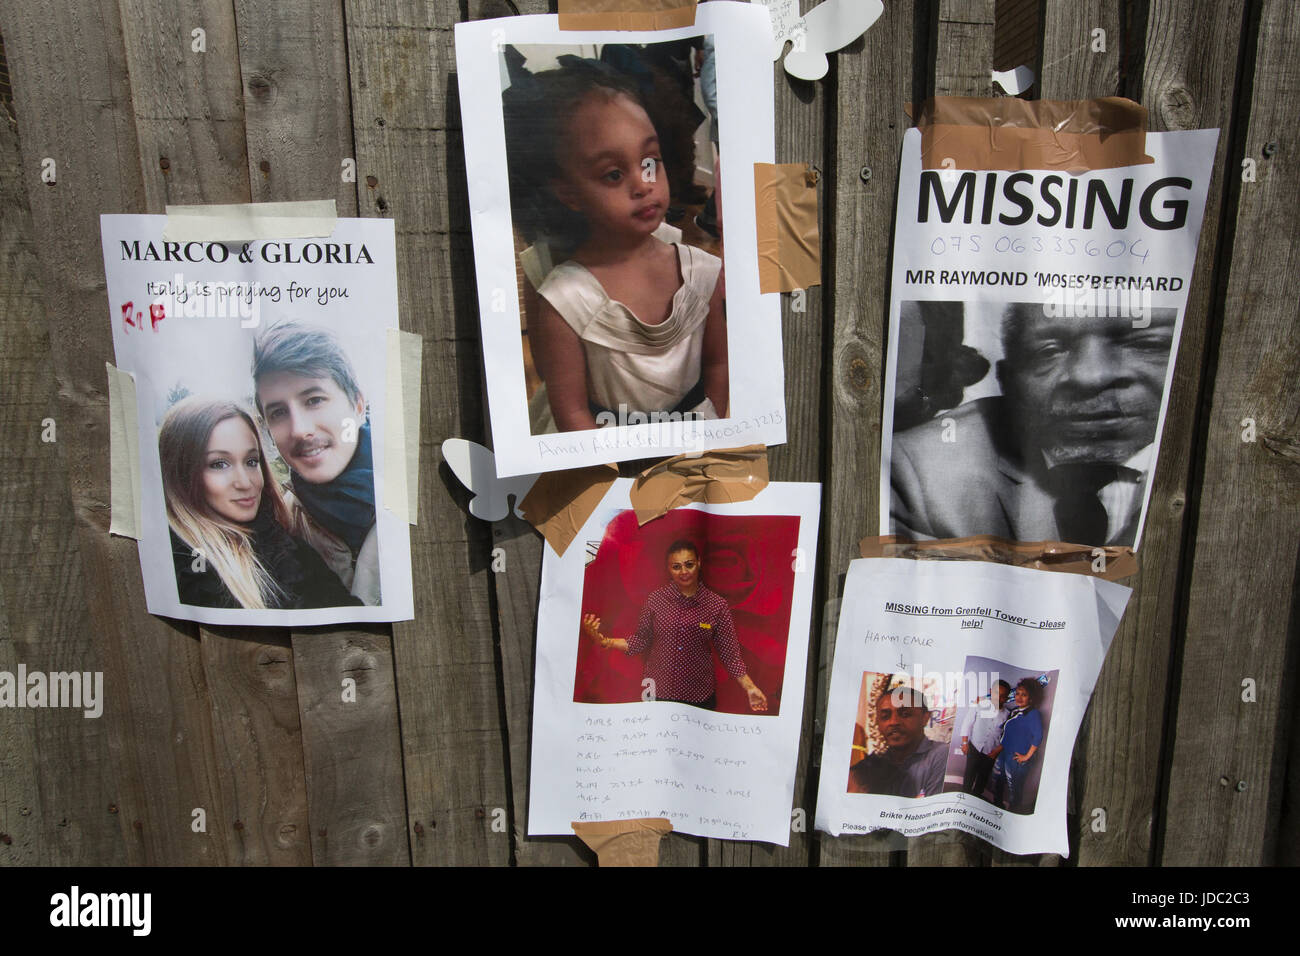 Photographs of the missing victims placed within the local community after the Grenfell Tower fire disaster, West London, UK Stock Photo